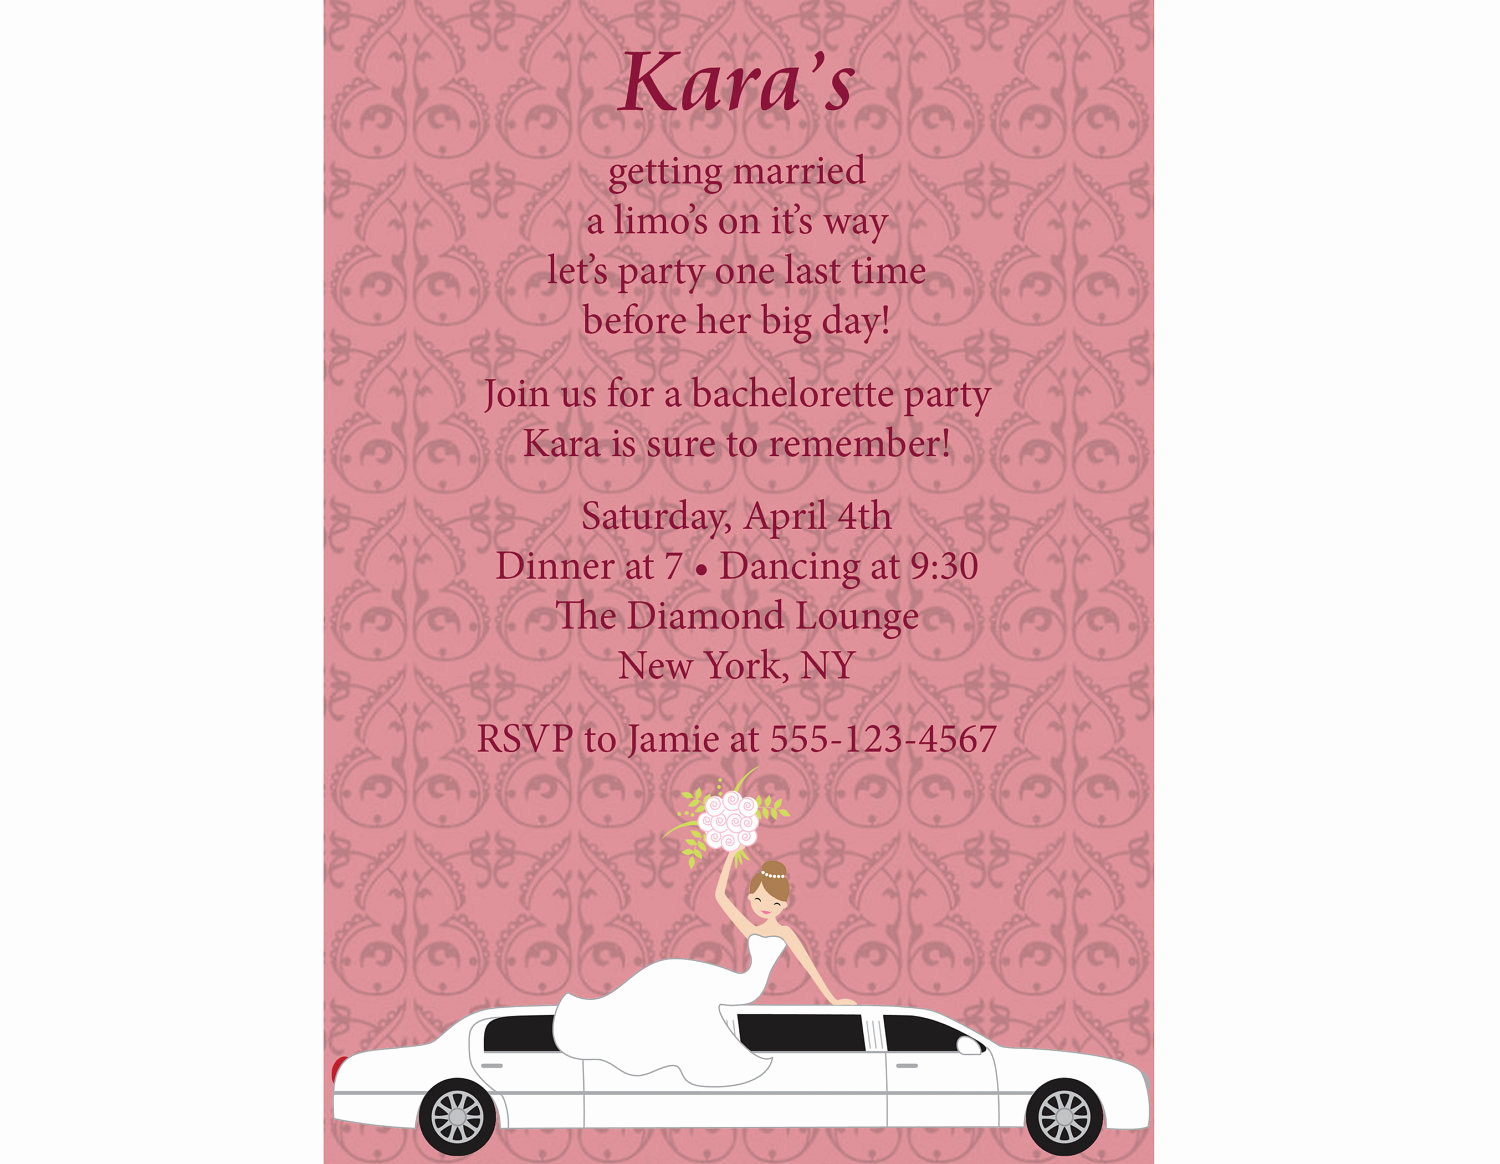 Bachelorette Party Invitation Wording New Limo Invitation for Bachelorette Party Printable Diy Invite